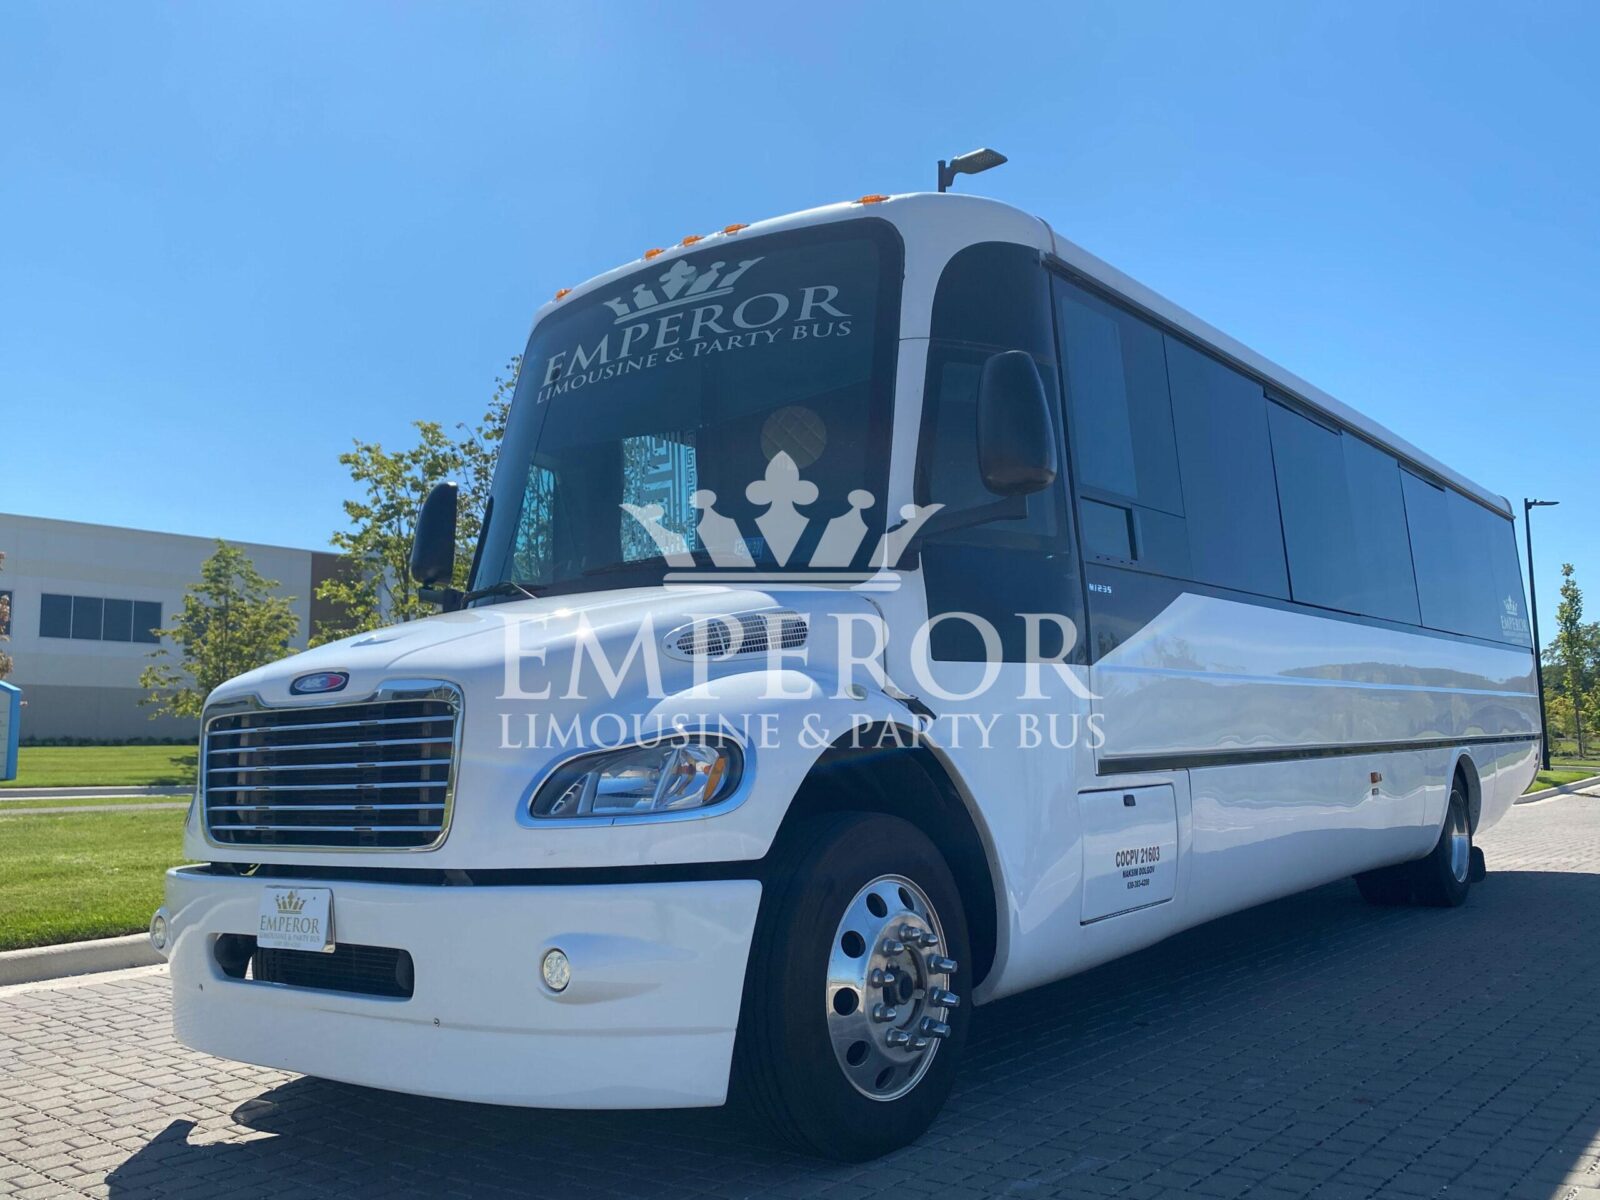 Party bus rental service in Addison